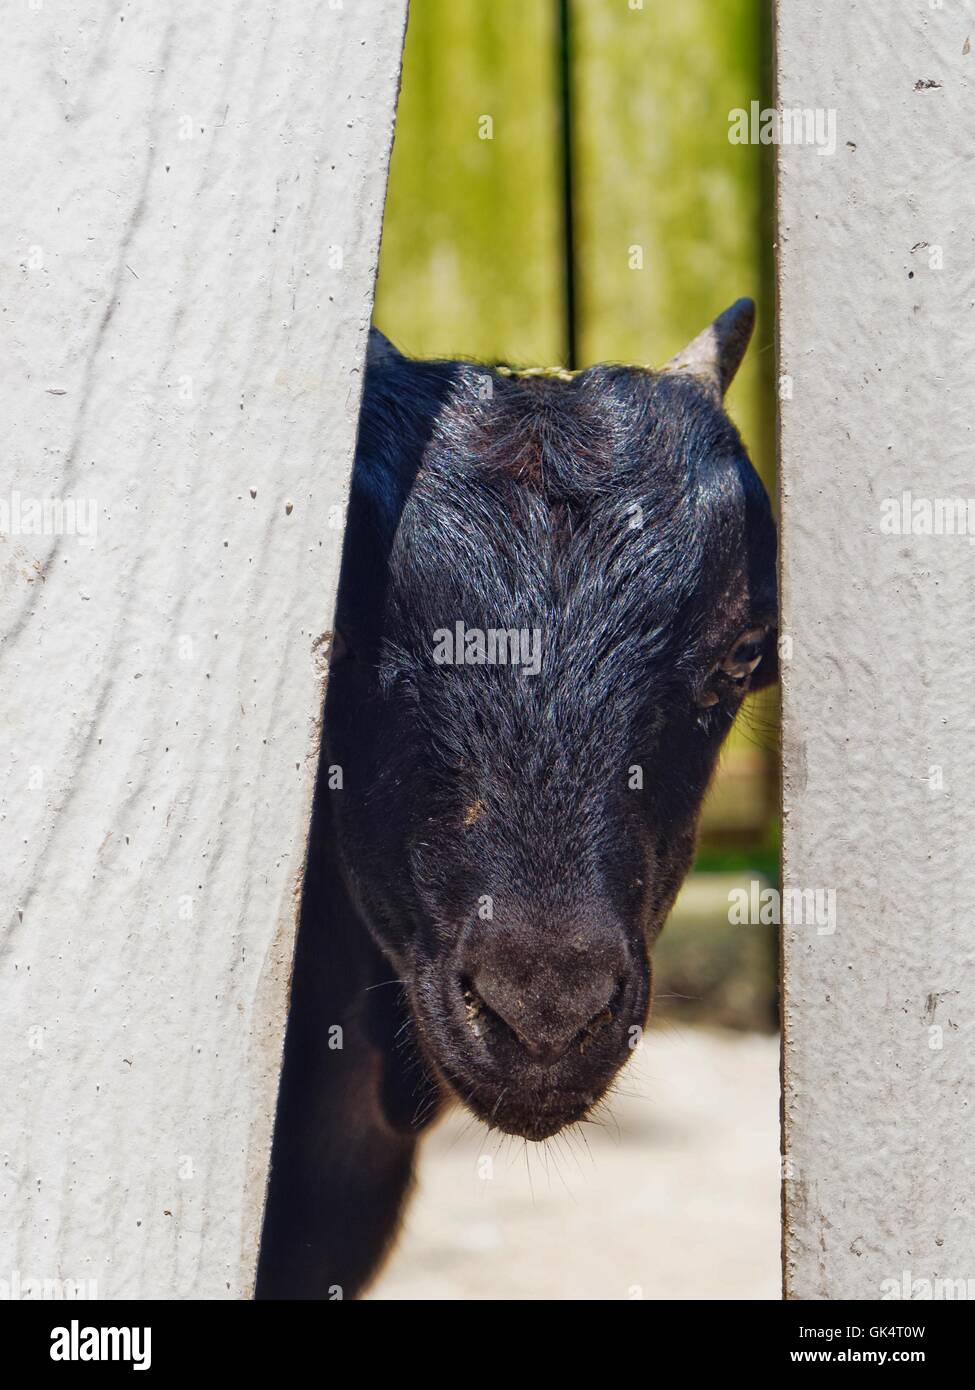 Here we have a goat looking for opportunity to break free from his enclosed environment. Stock Photo